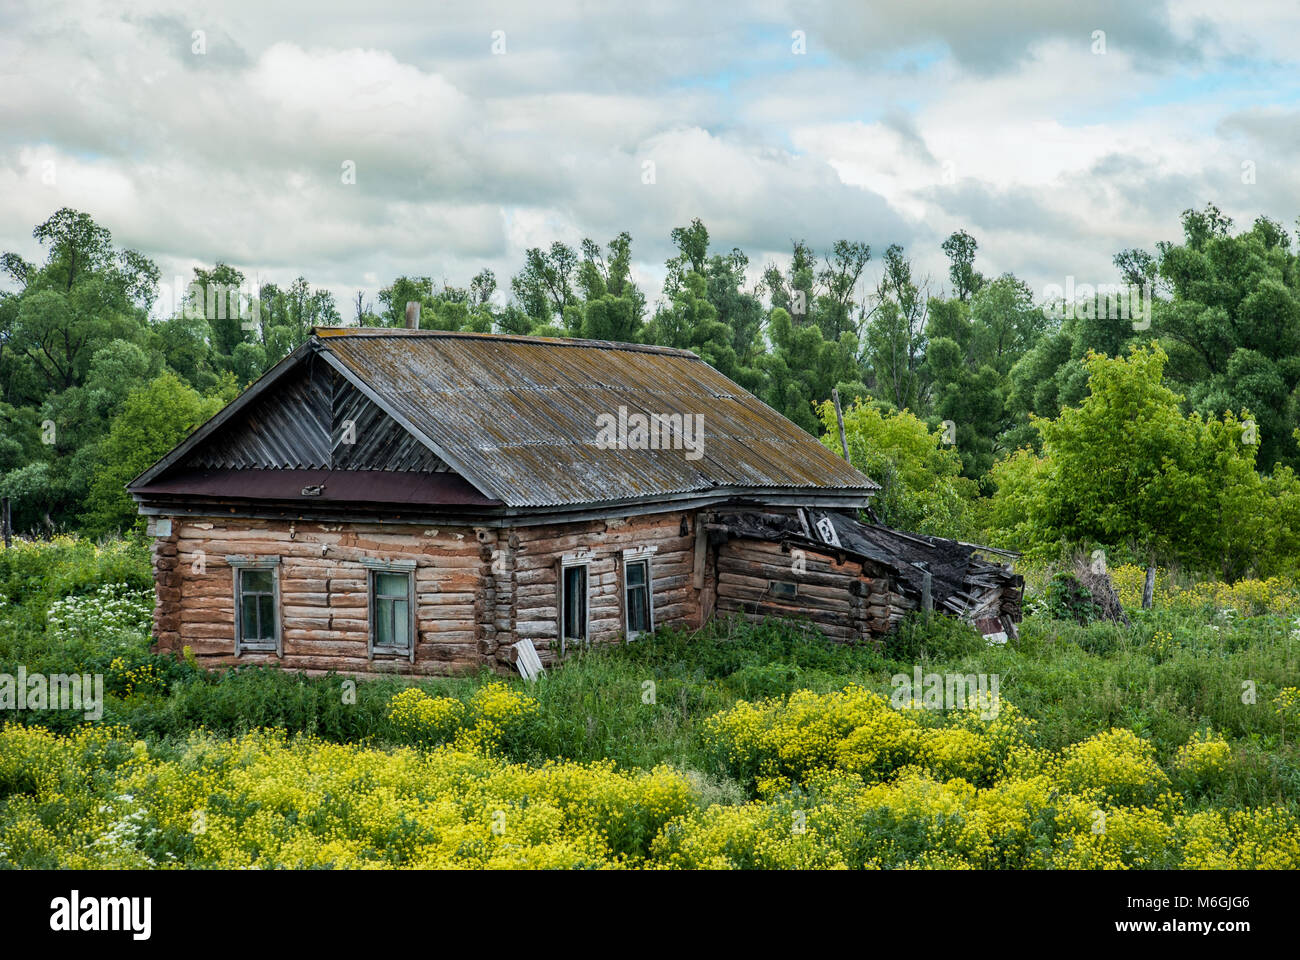 Old shack and blooming grass in countryside. Yellow flowers and green grass growing near aged wooden hut against cloudy sky. Abandoned old log house Stock Photo